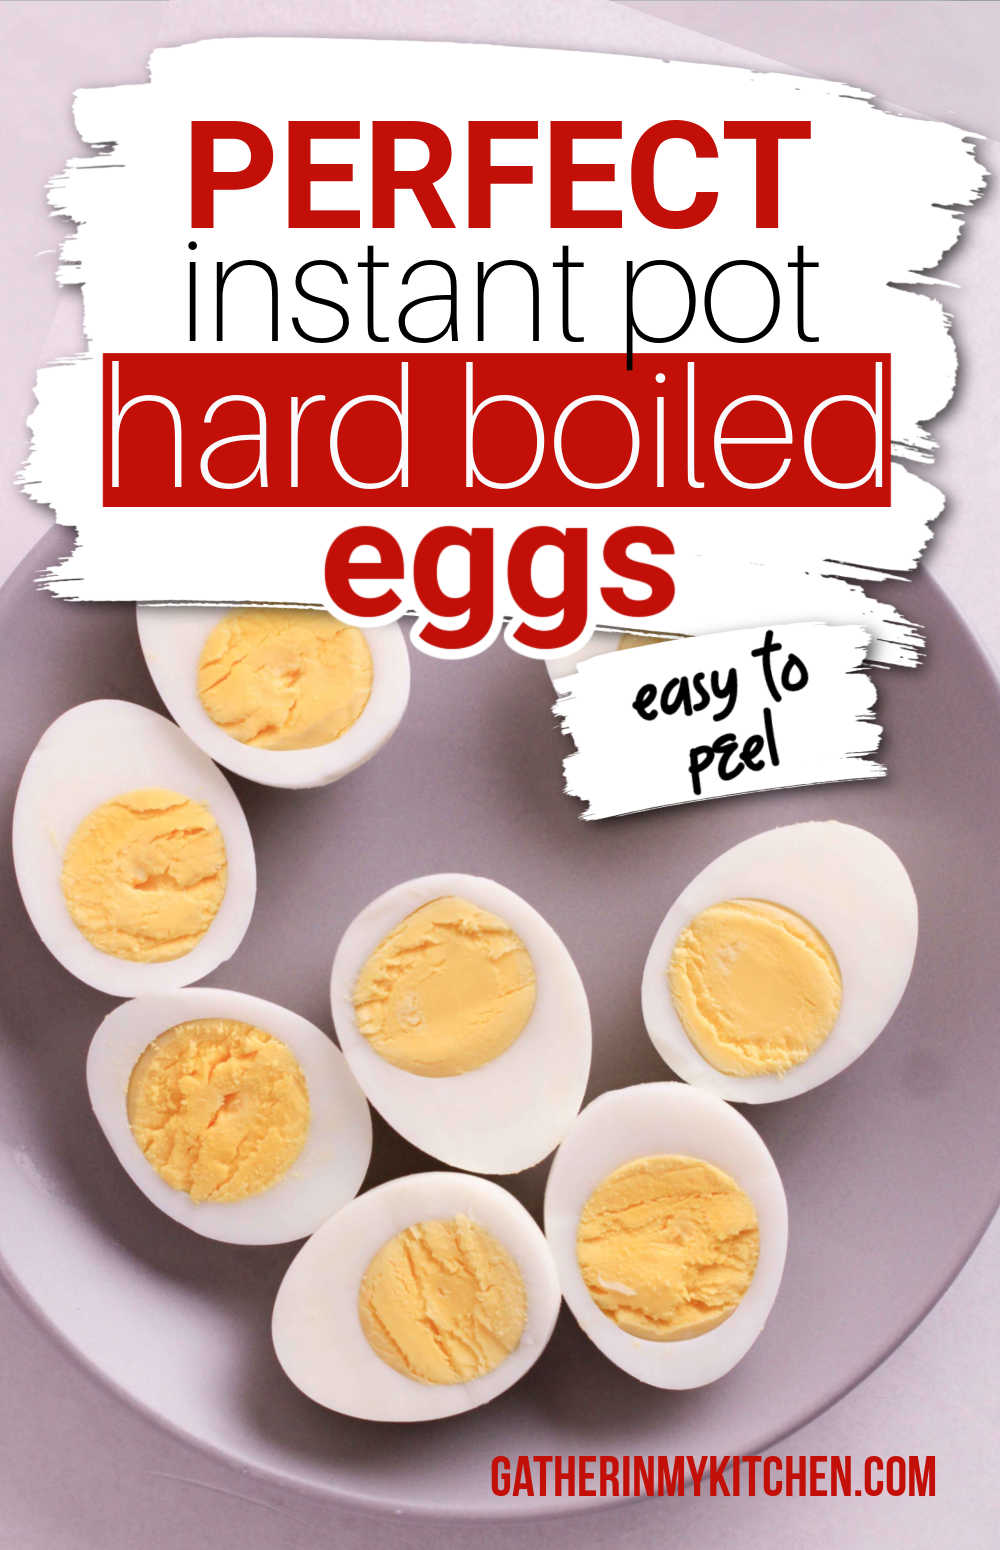 Pin image: top says "Perfect Instant Pot hard boiled eggs: easy to peel" and bottom has a pic of hard boiled eggs cut in half.